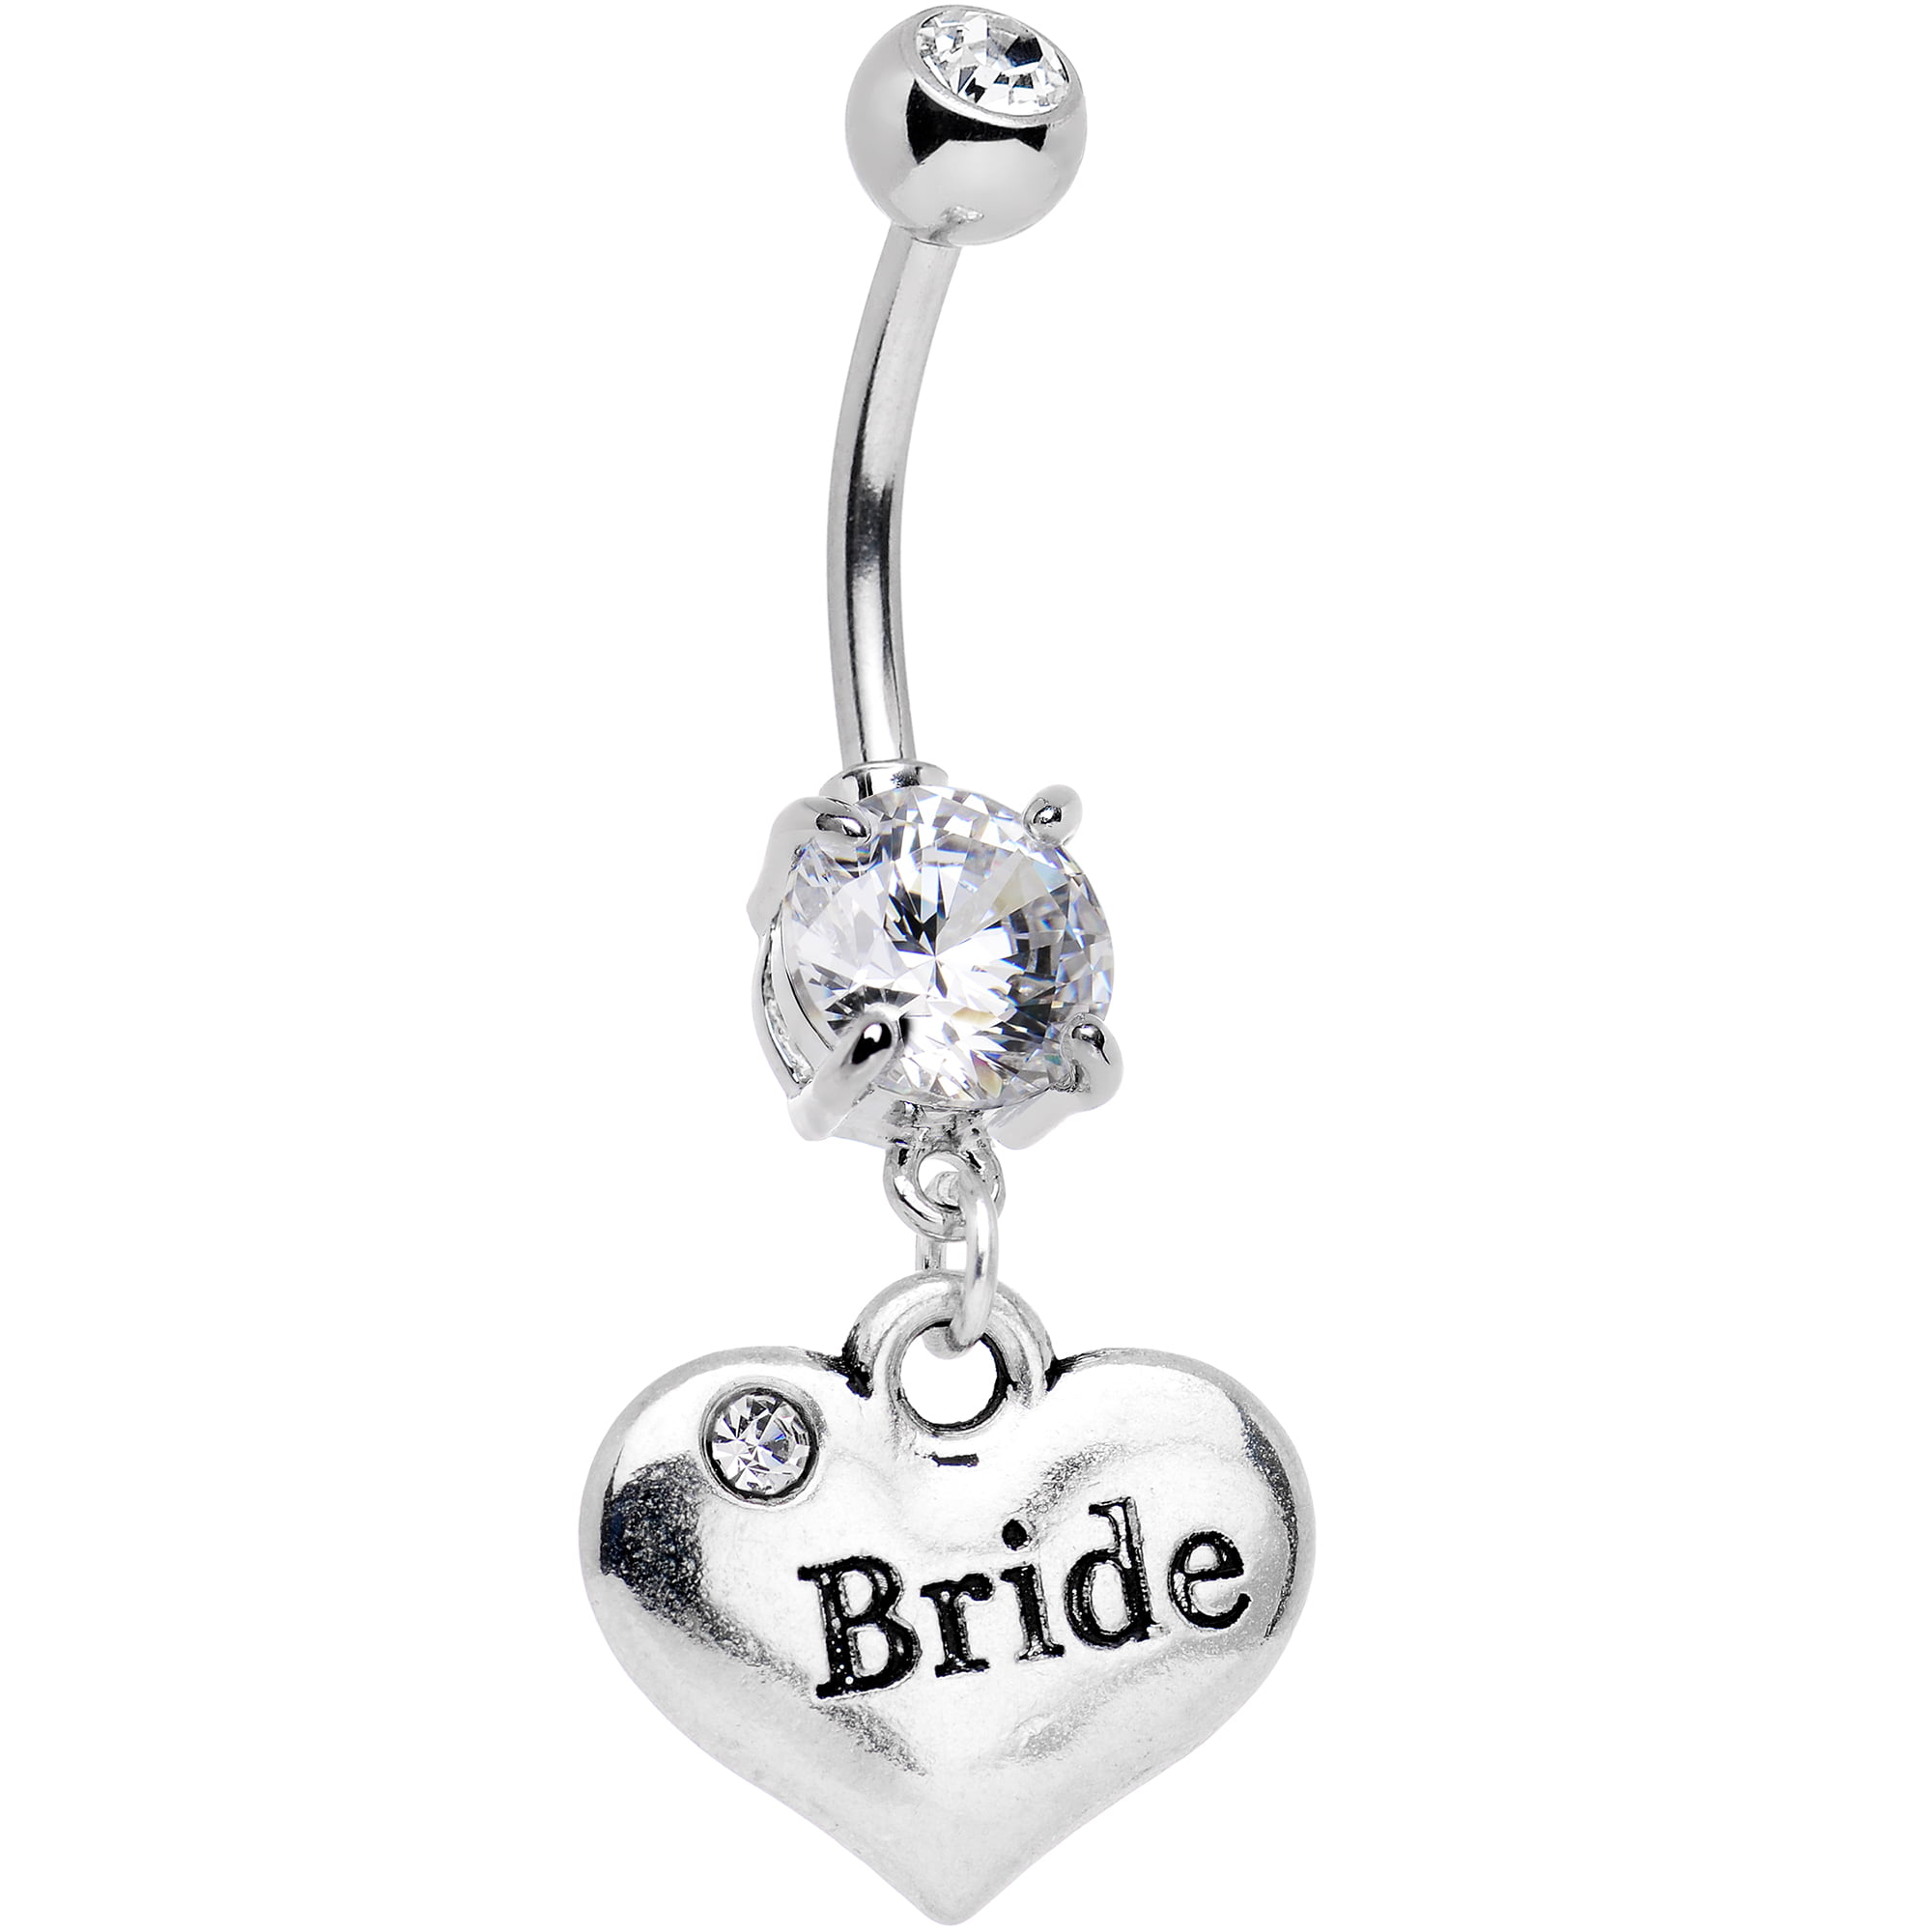 Body Candy Steel Shot in The Heart Dangle Belly Ring